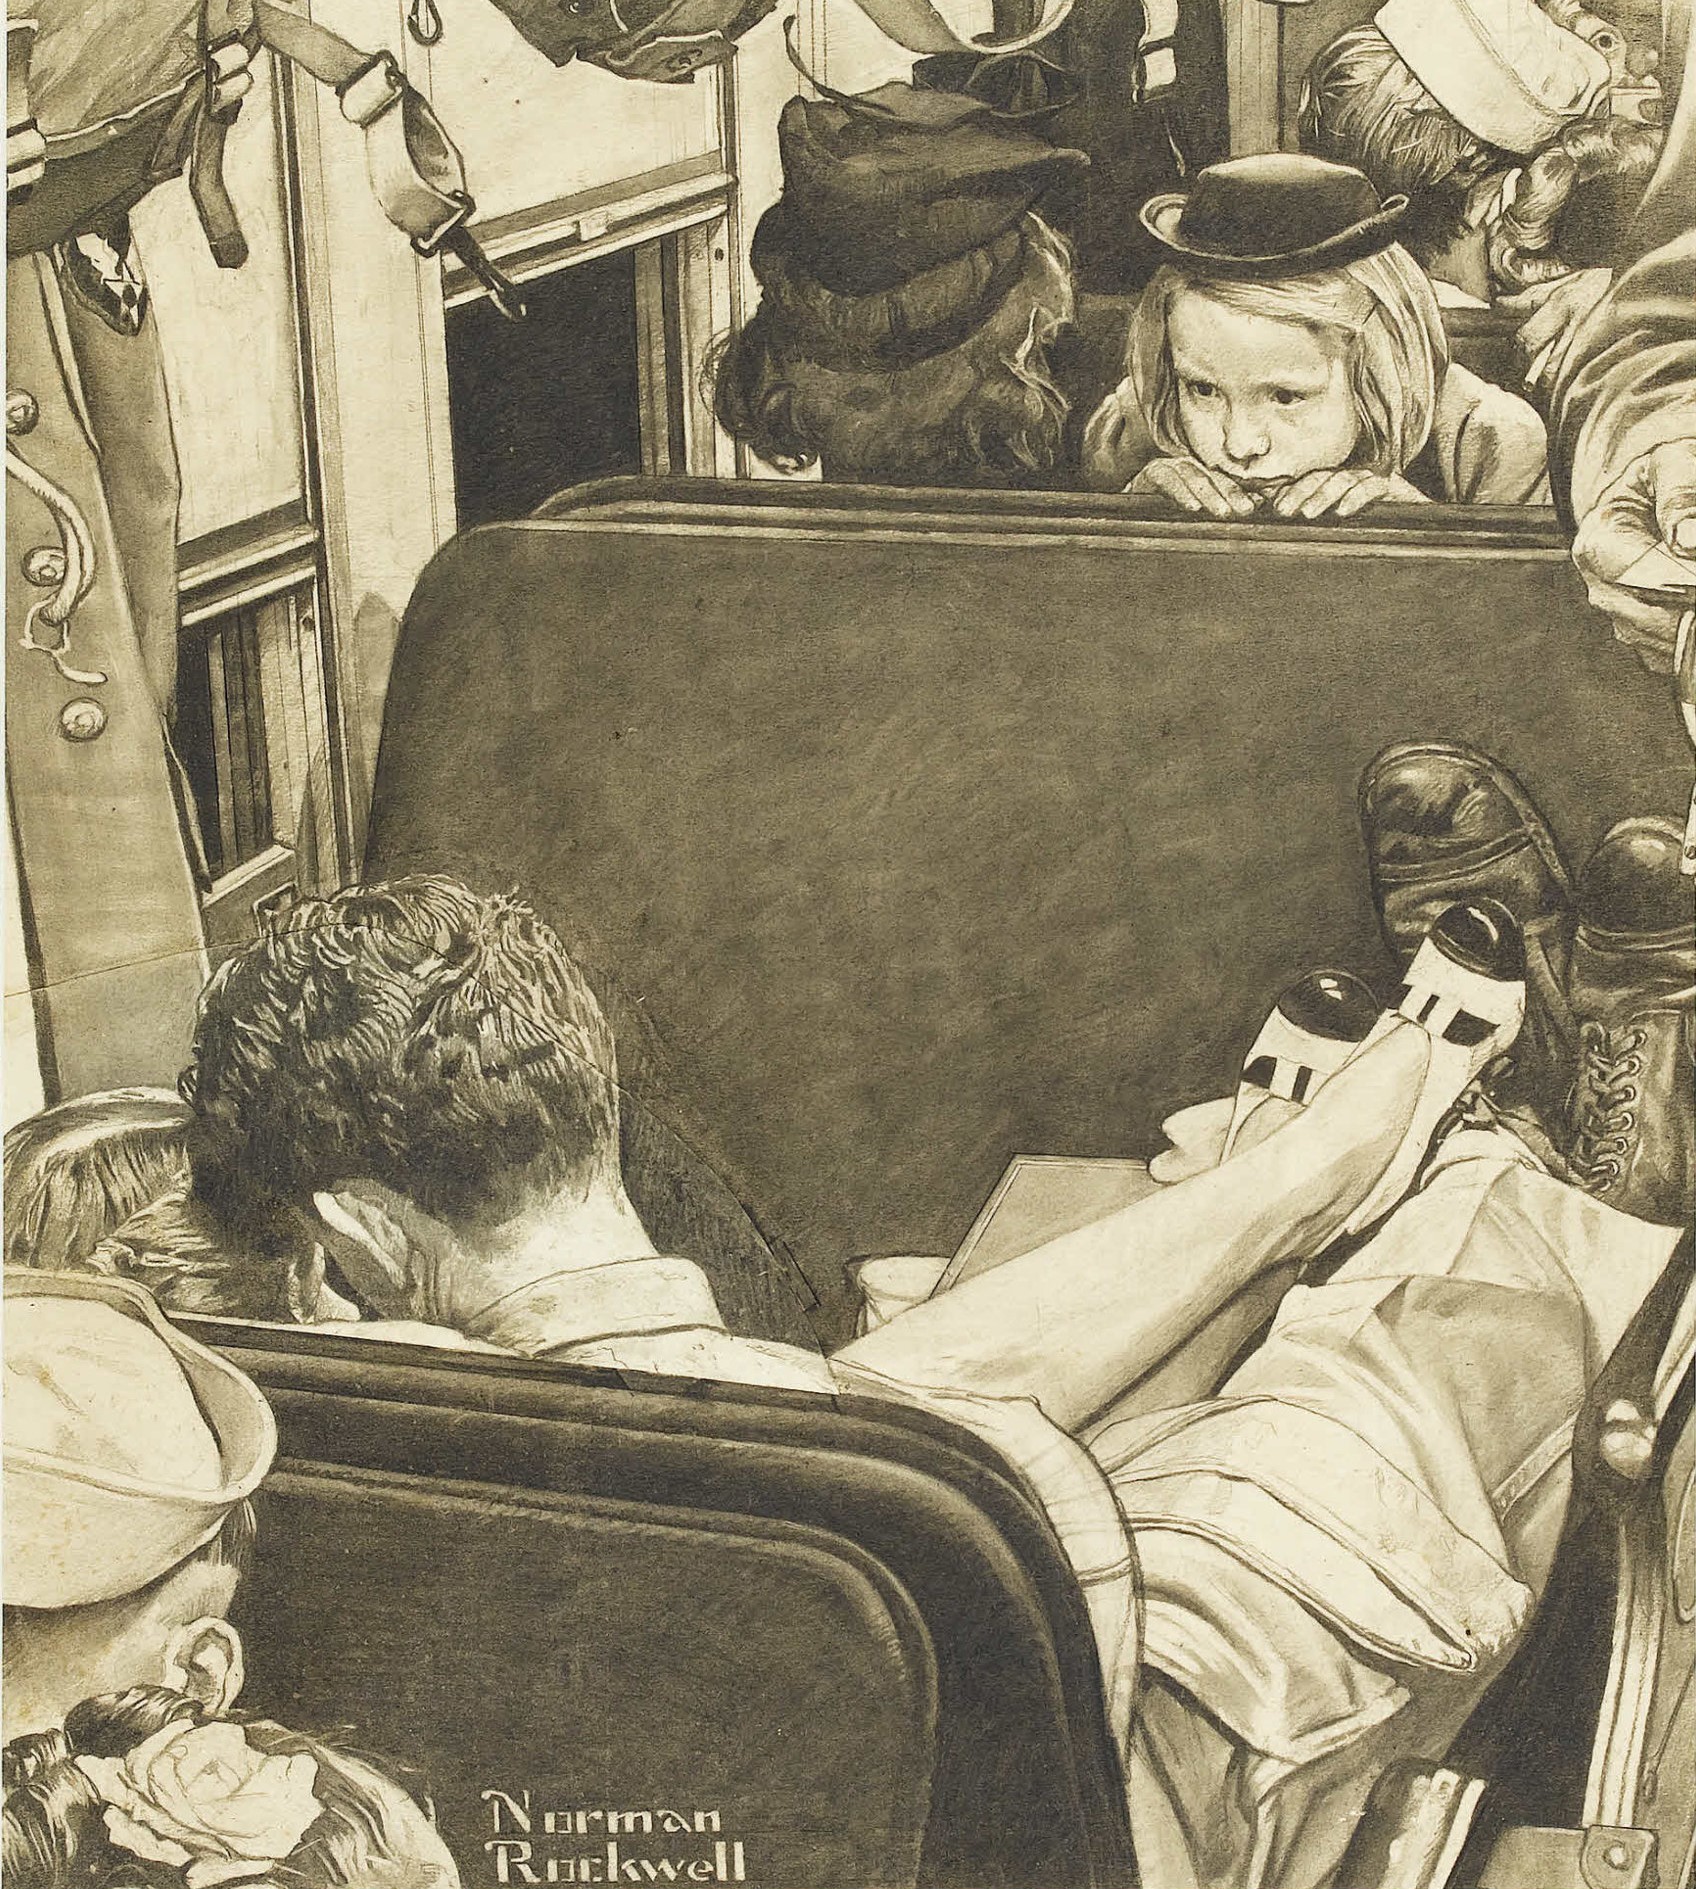 Little Girl Observing Lovers on a Train study, 1944, by Norman Rockwell.jpg